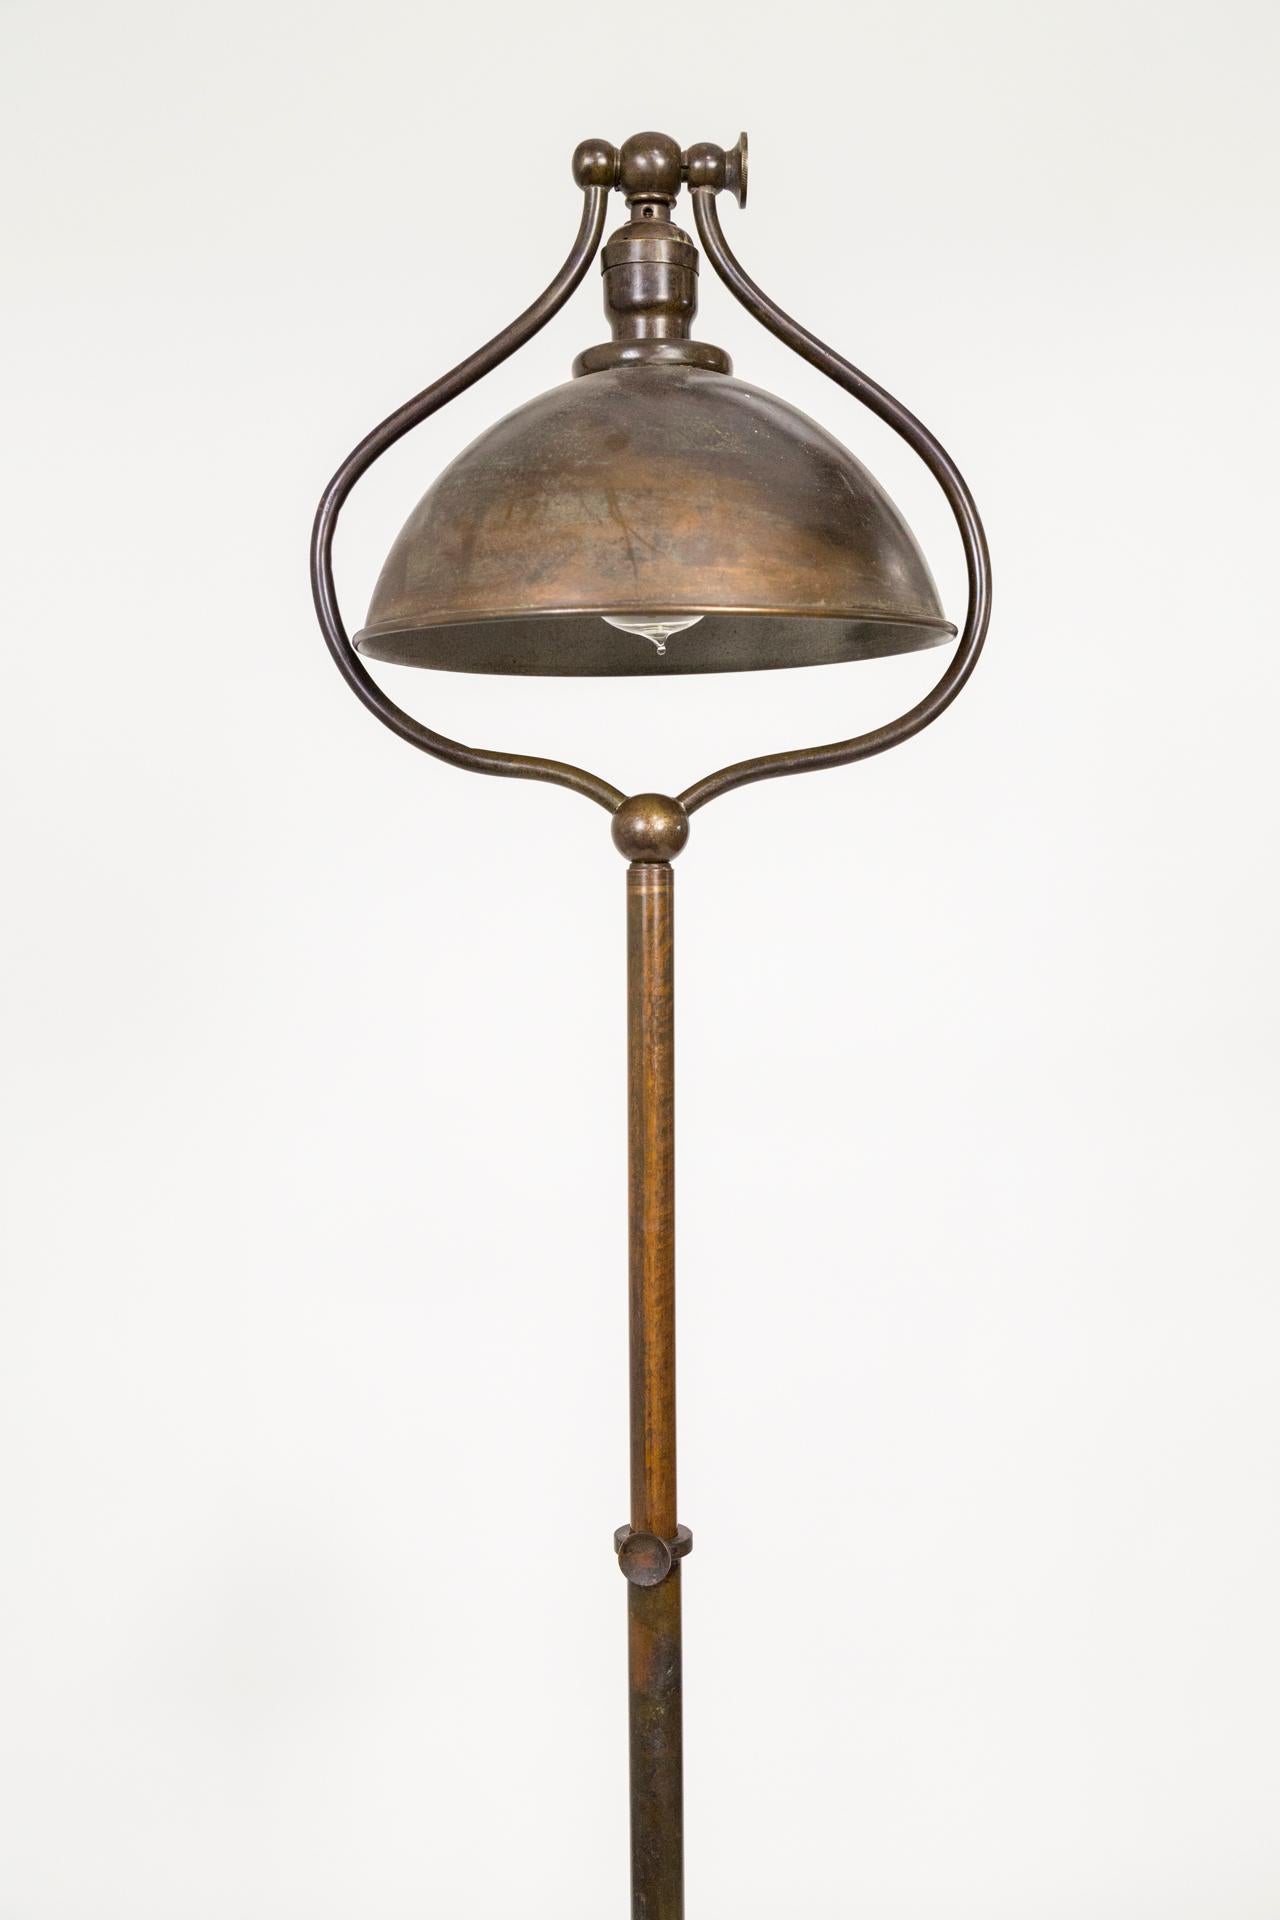 A 1920s, all-metal, adjustable, smoker's floor lamp in by Bradley & Hubbard; with an articulating, dome shade - harp style - framed in a curved shape. Brass structure in a rich, brown patina, with a weighted base and match holder tray; newly